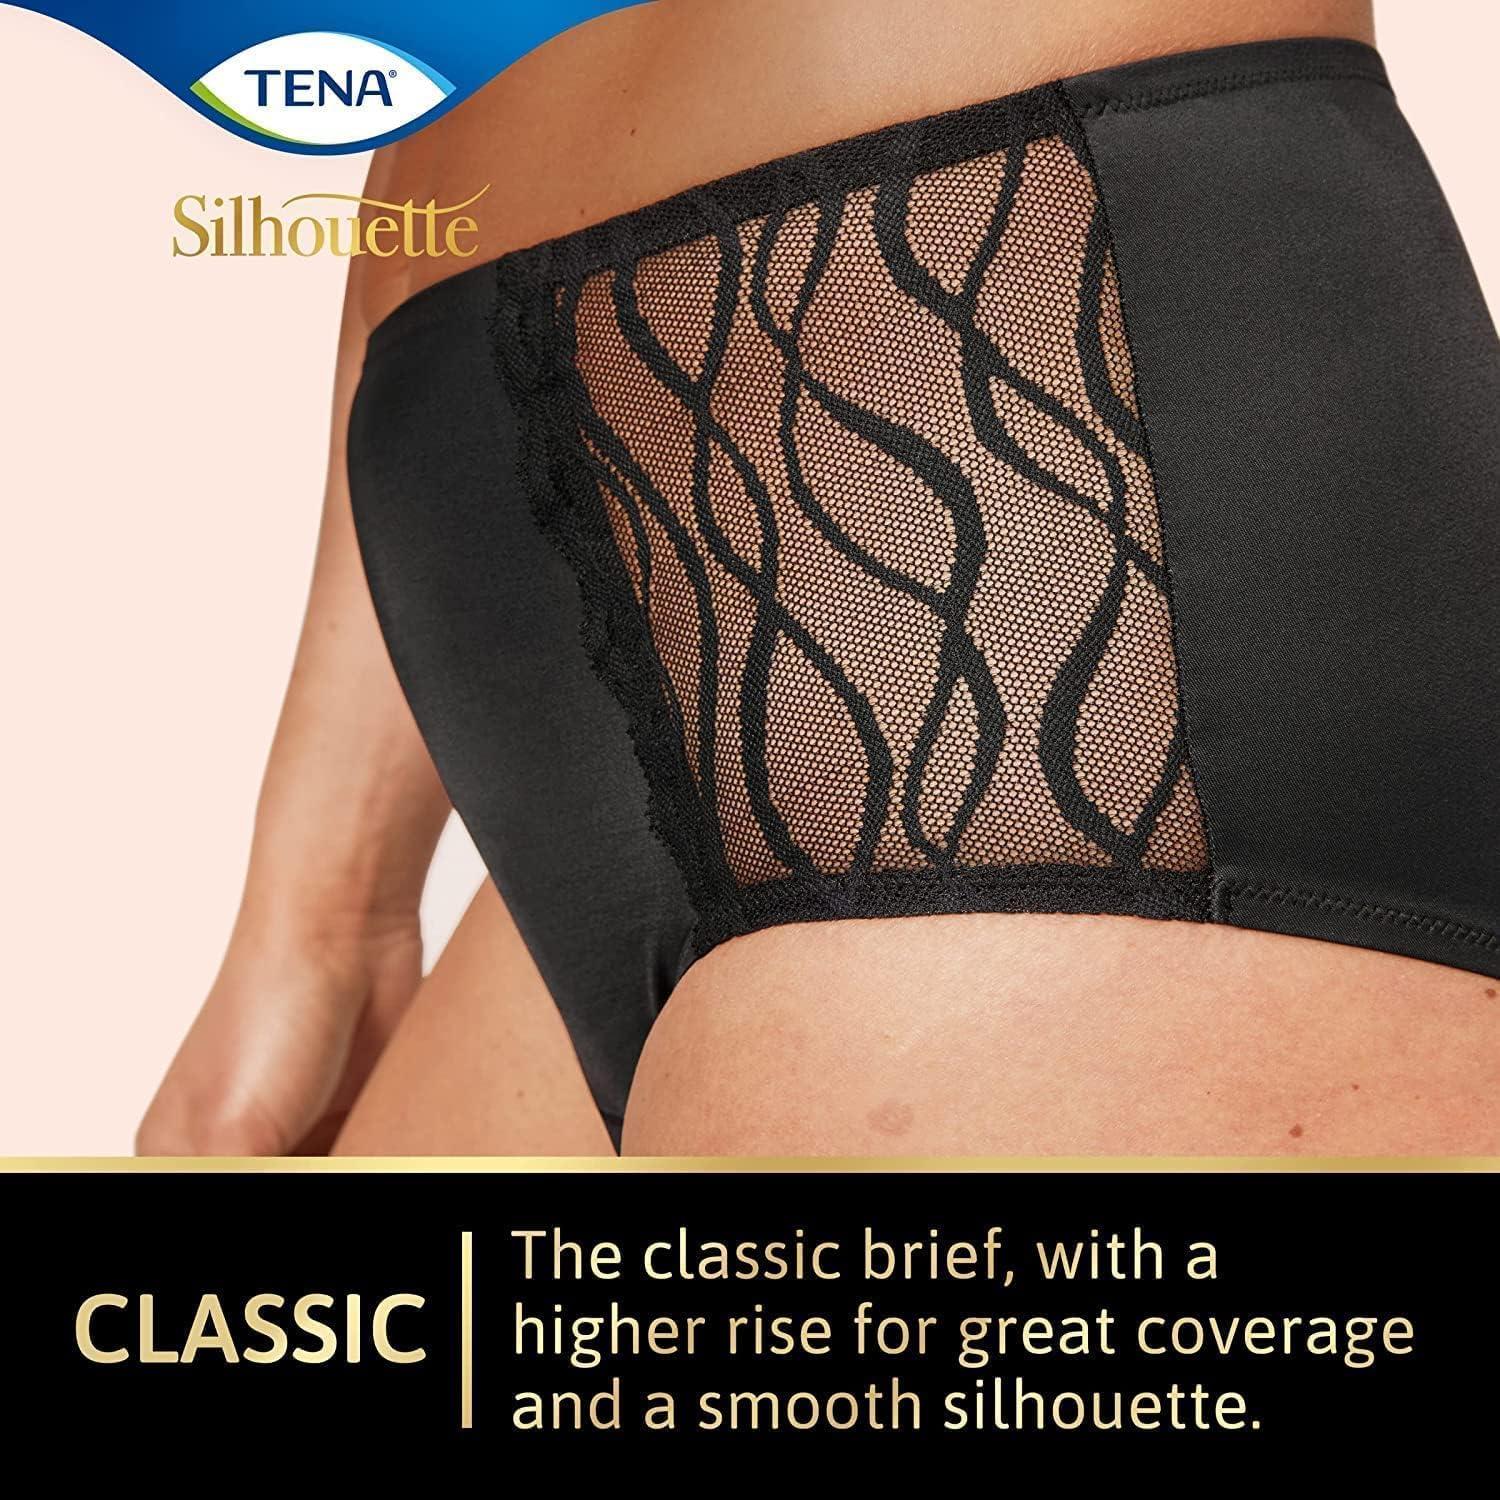 TENA Silhouette - Women's Washable Incontinence Pants - Soft and Stretchy -  Black - 3X Protection for Light Leaks Dry and Secure with Odour Control -  Pack of 1 Black Size S